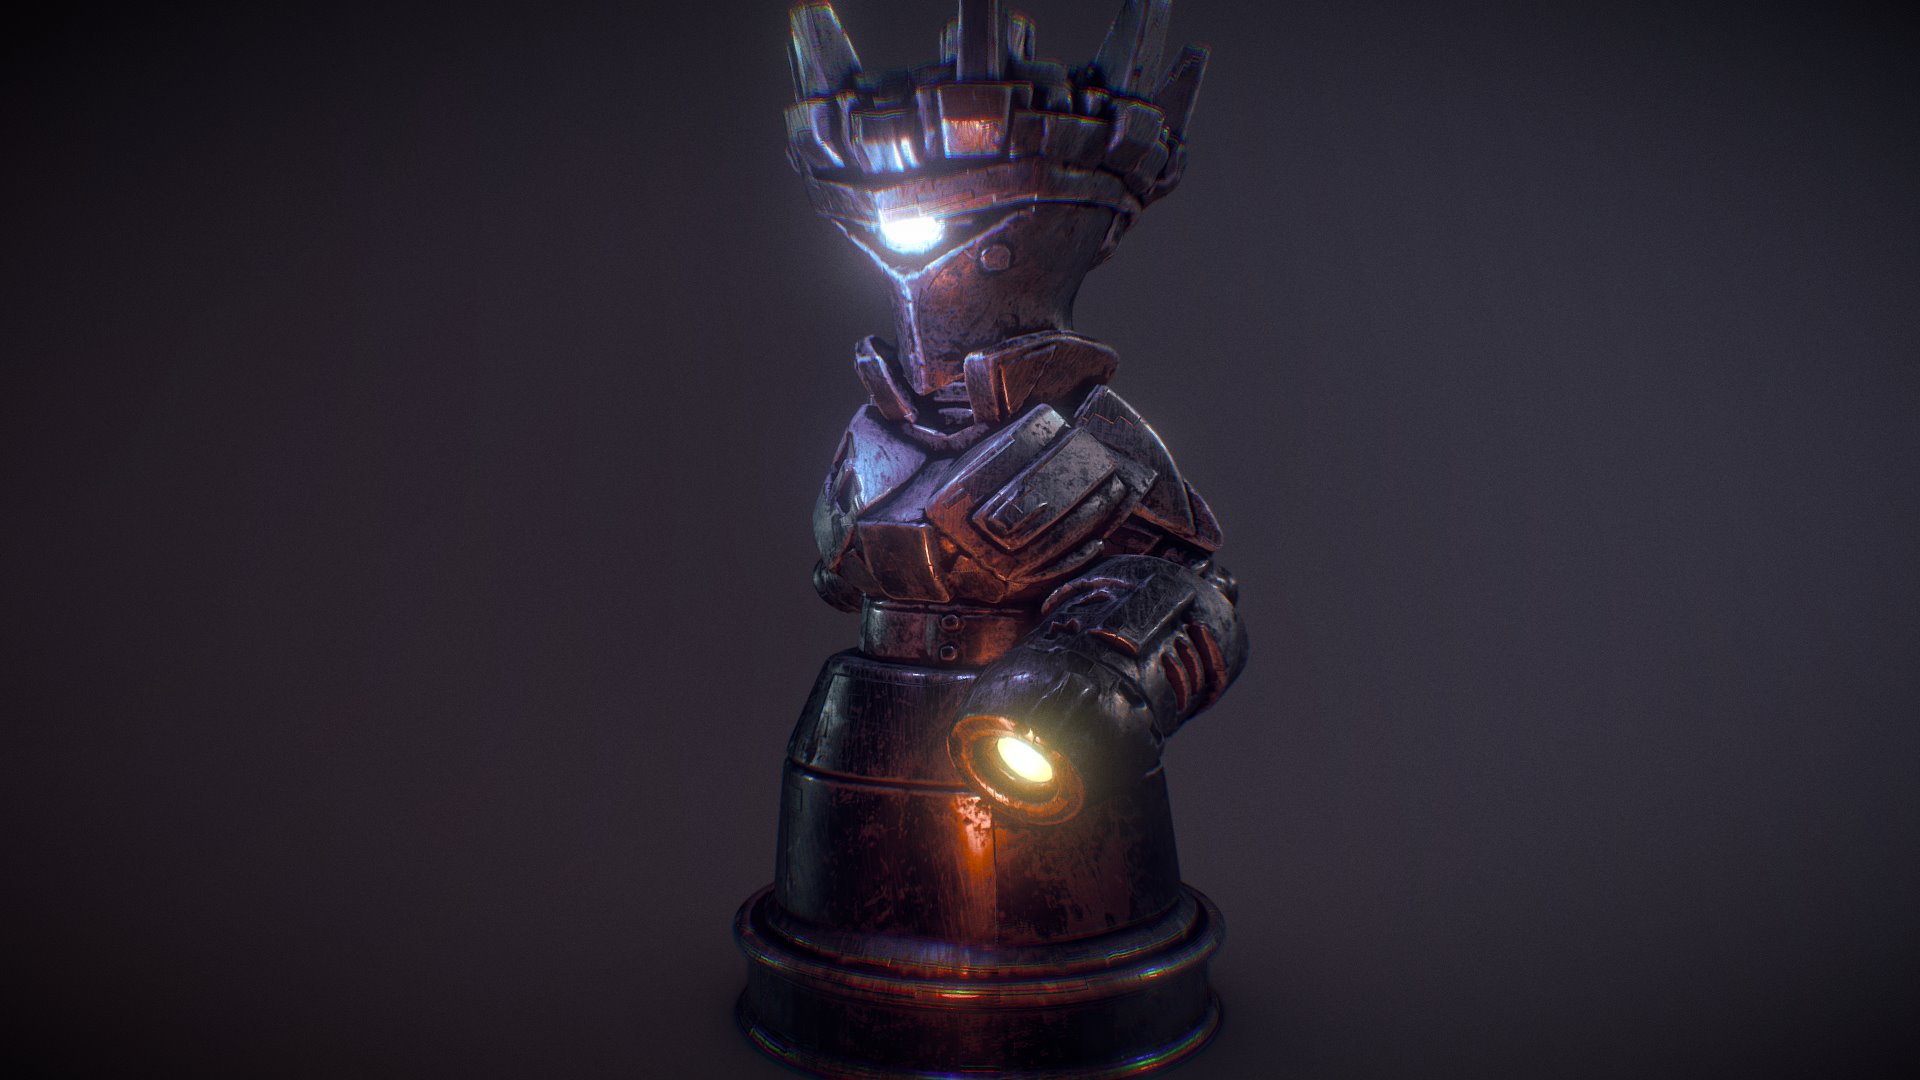 Queen of the Robots. A piece from Chess Fight. Resin cast pieces now available at www.chess-fight.com ! Sculpted in Oculus Medium, texture added in Substance Painter 3d model